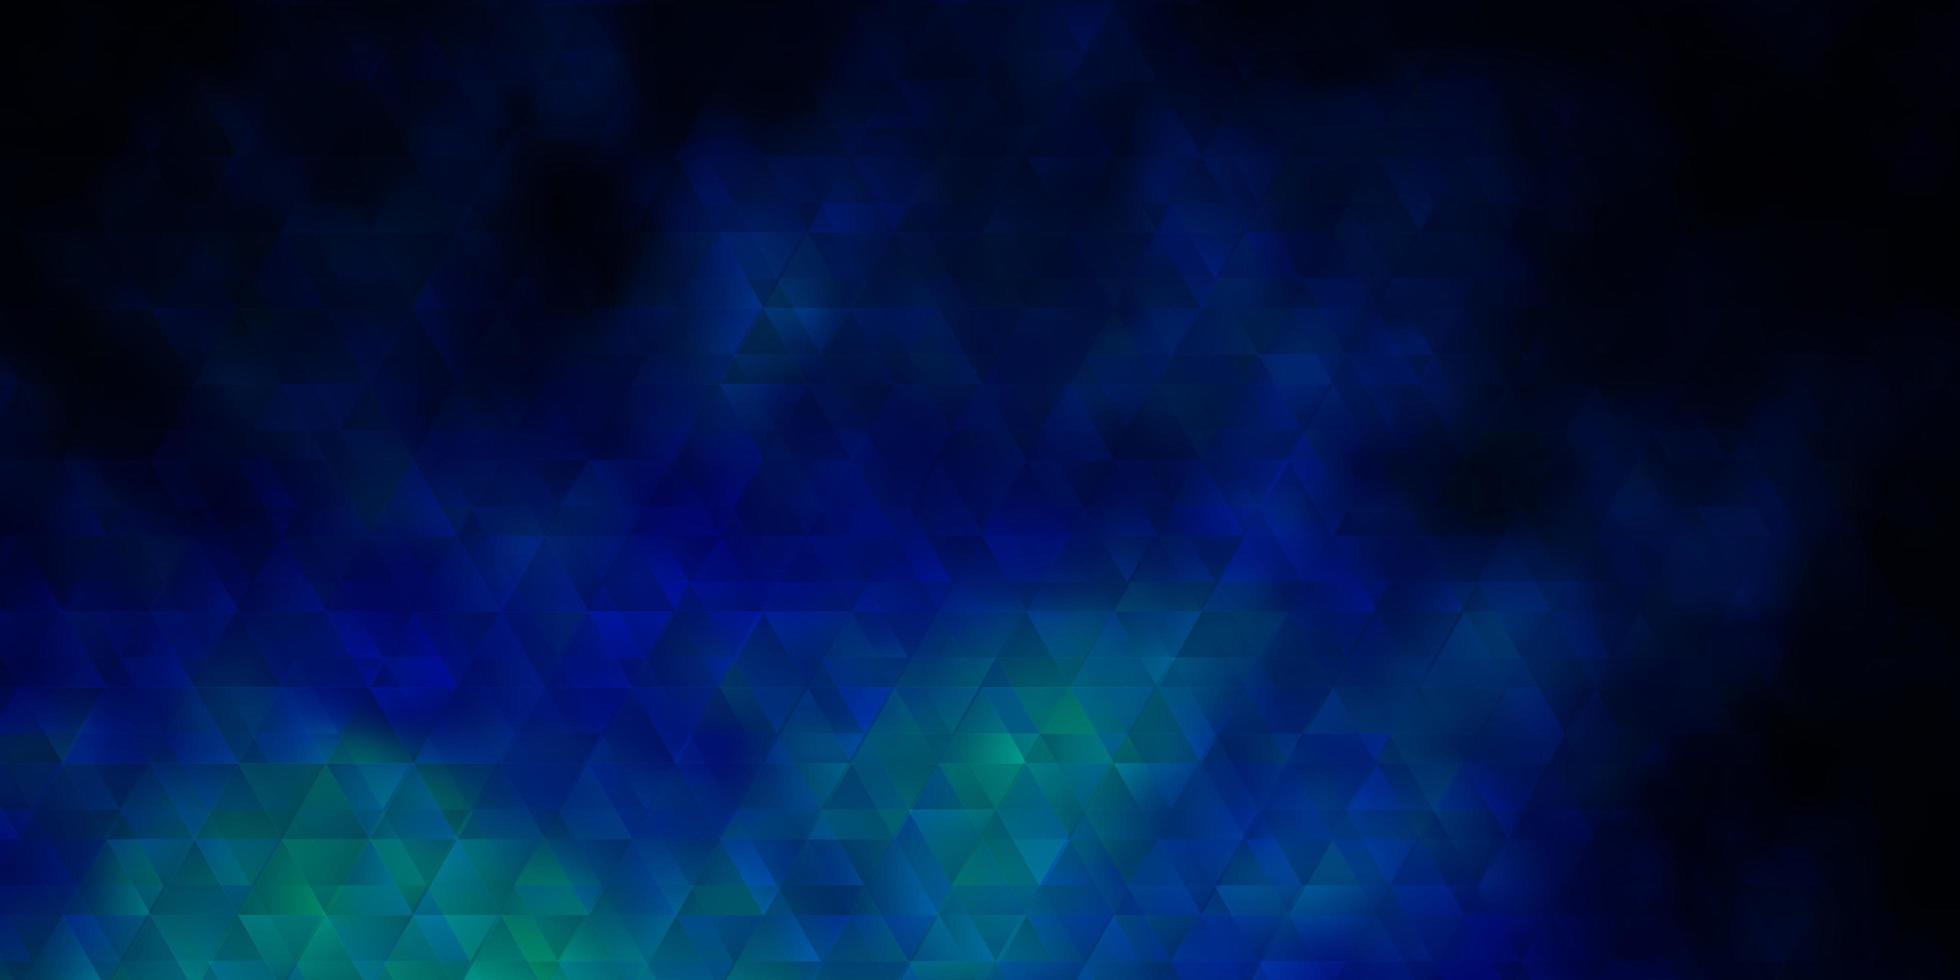 Dark BLUE vector template with lines, triangles.